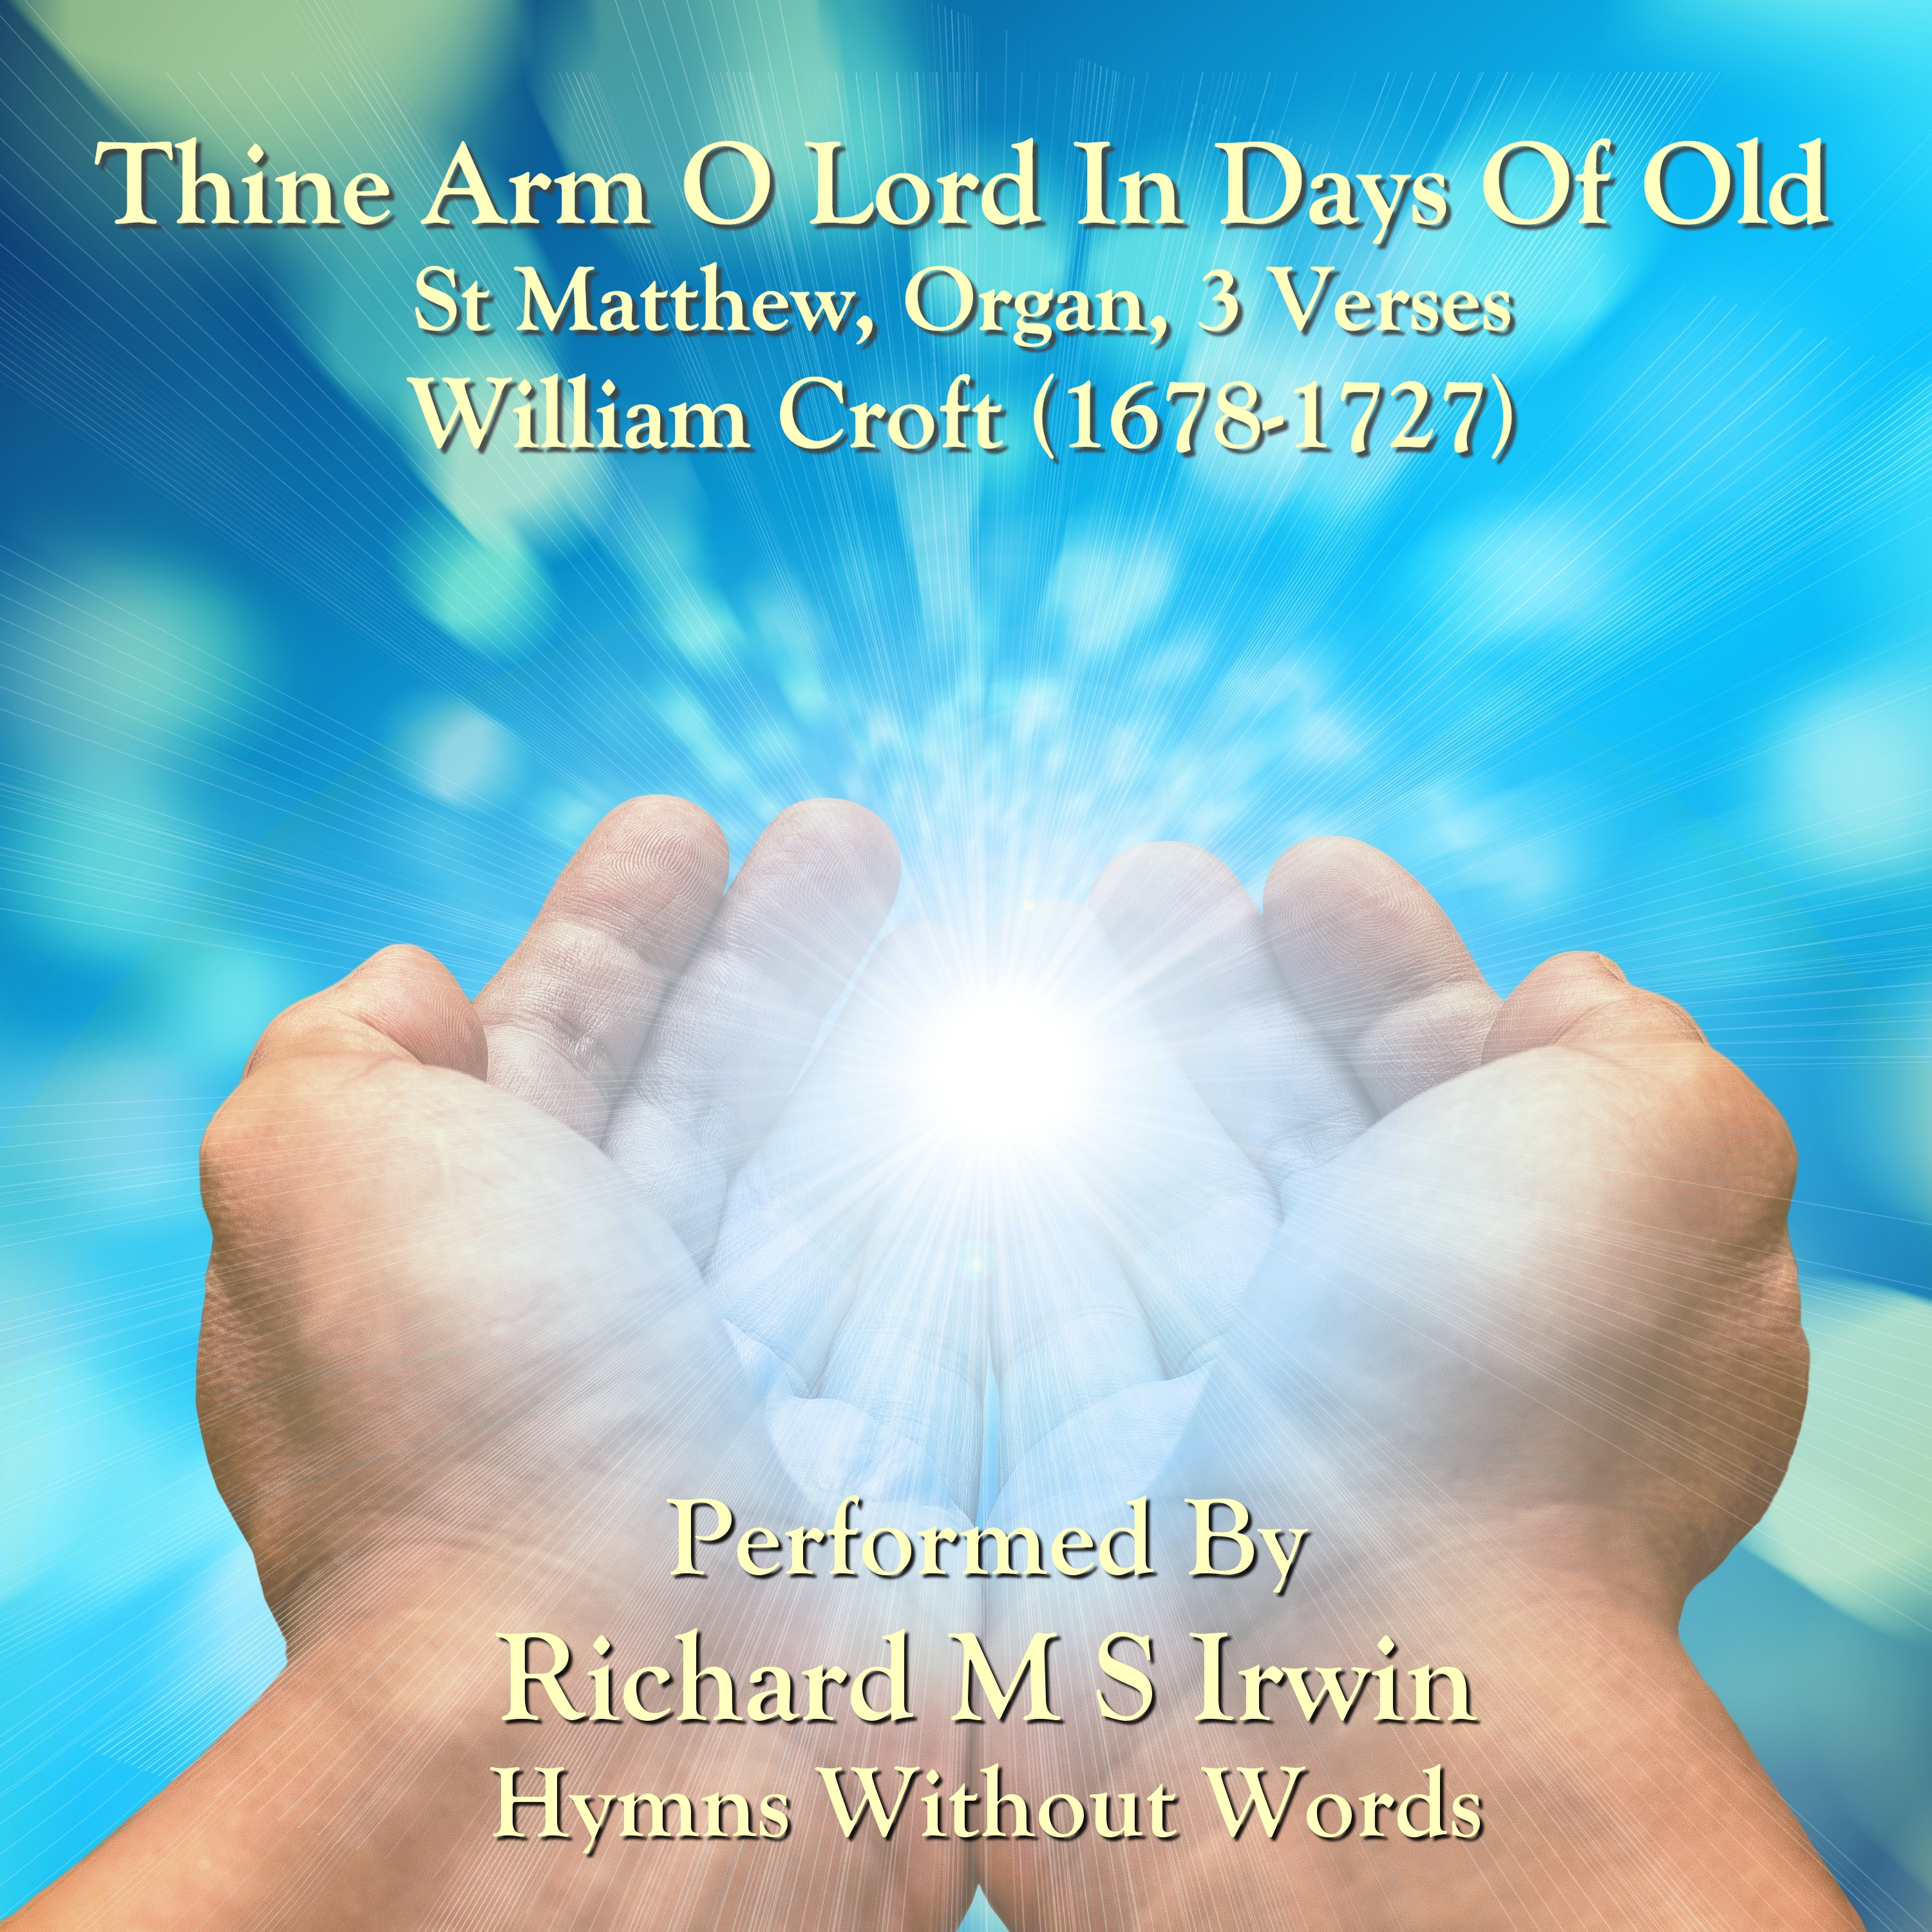 Thine Arm O Lord In Days Of Old (St Matthew, Organ, 3 Verses)